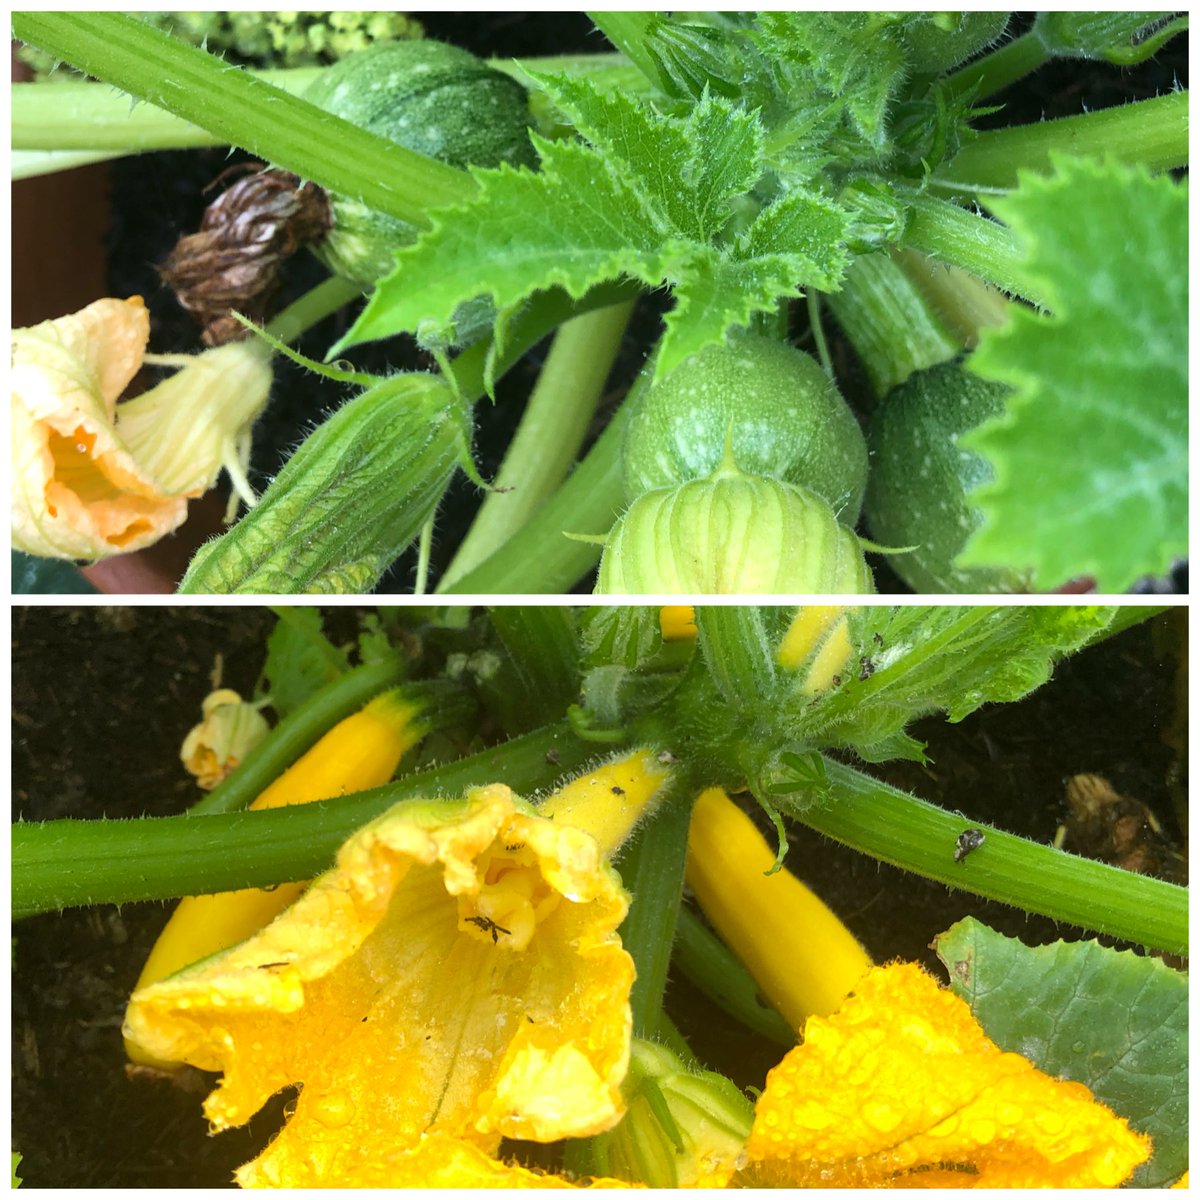 #5 of this  #SixonSaturday has to be my meagre attempts at herbs and vegetables. We’re eagerly awaiting the courgettes. Have grown them from seed for the first time this year and especially excited about the round variety!  @cavershamjj 5/6  #gyo  #Horticulture